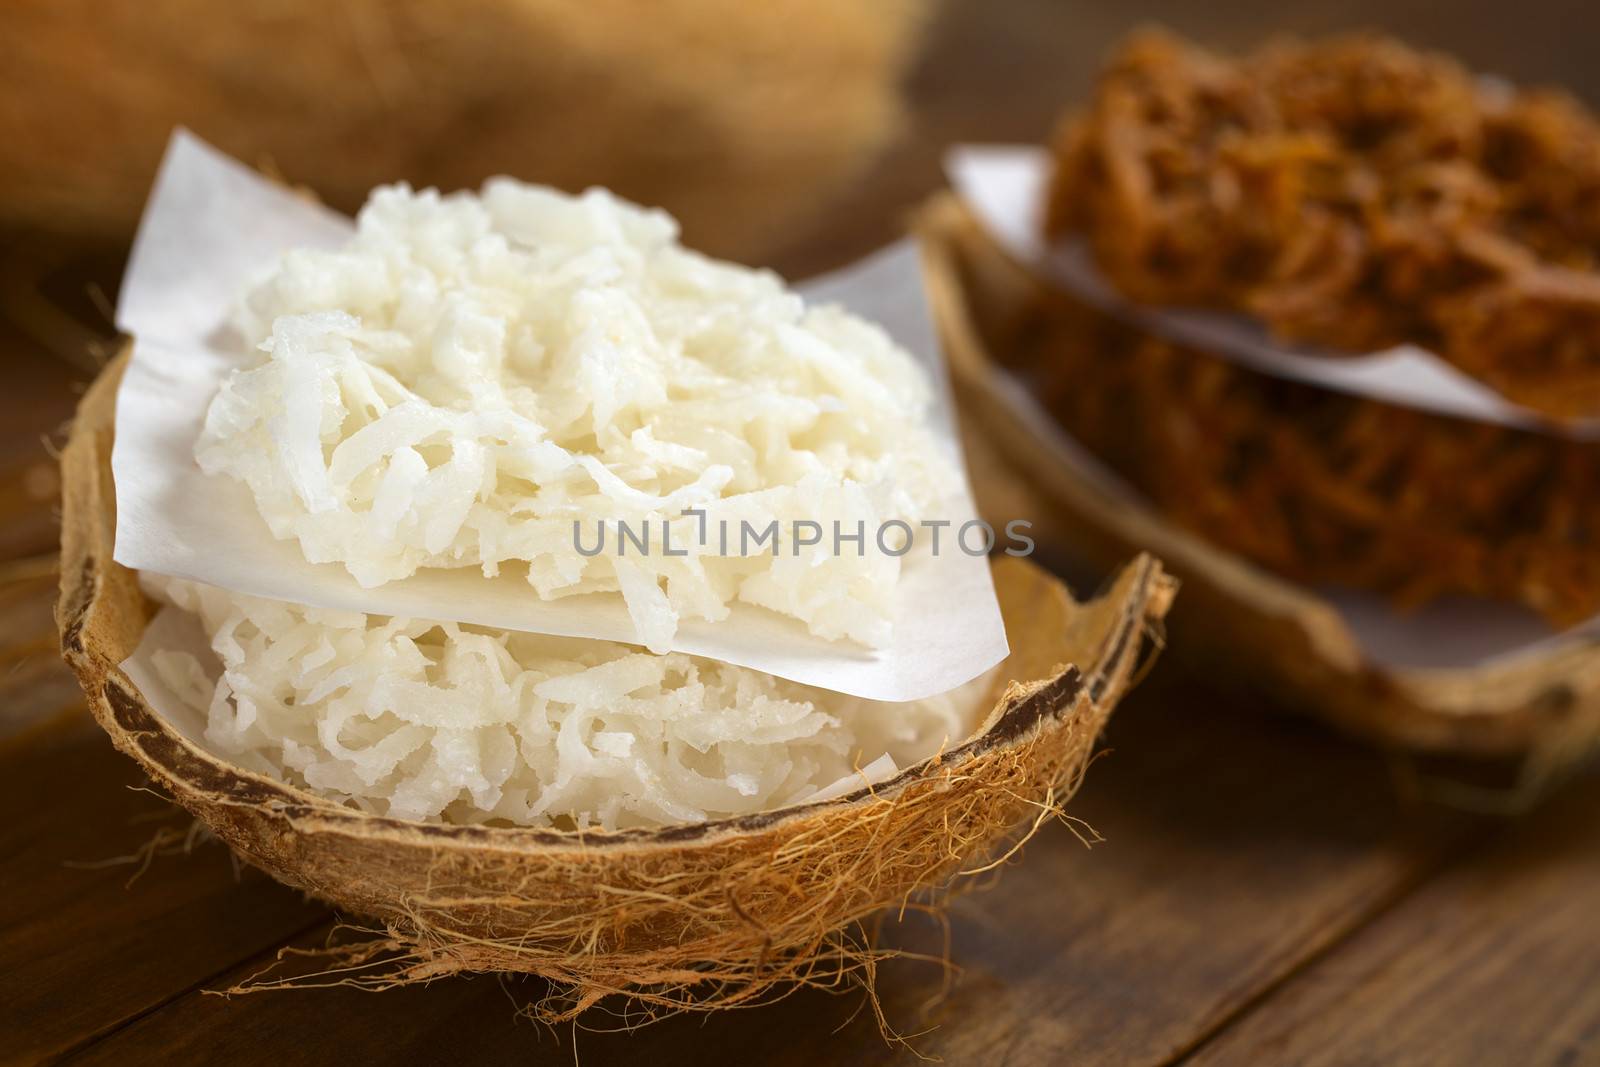 Peruvian cocadas, a traditional coconut dessert sold usually on the streets, made of grated coconut and white or brown sugar, which gives the different coloring of the sweet (Selective Focus, Focus on the front of the cocadas)